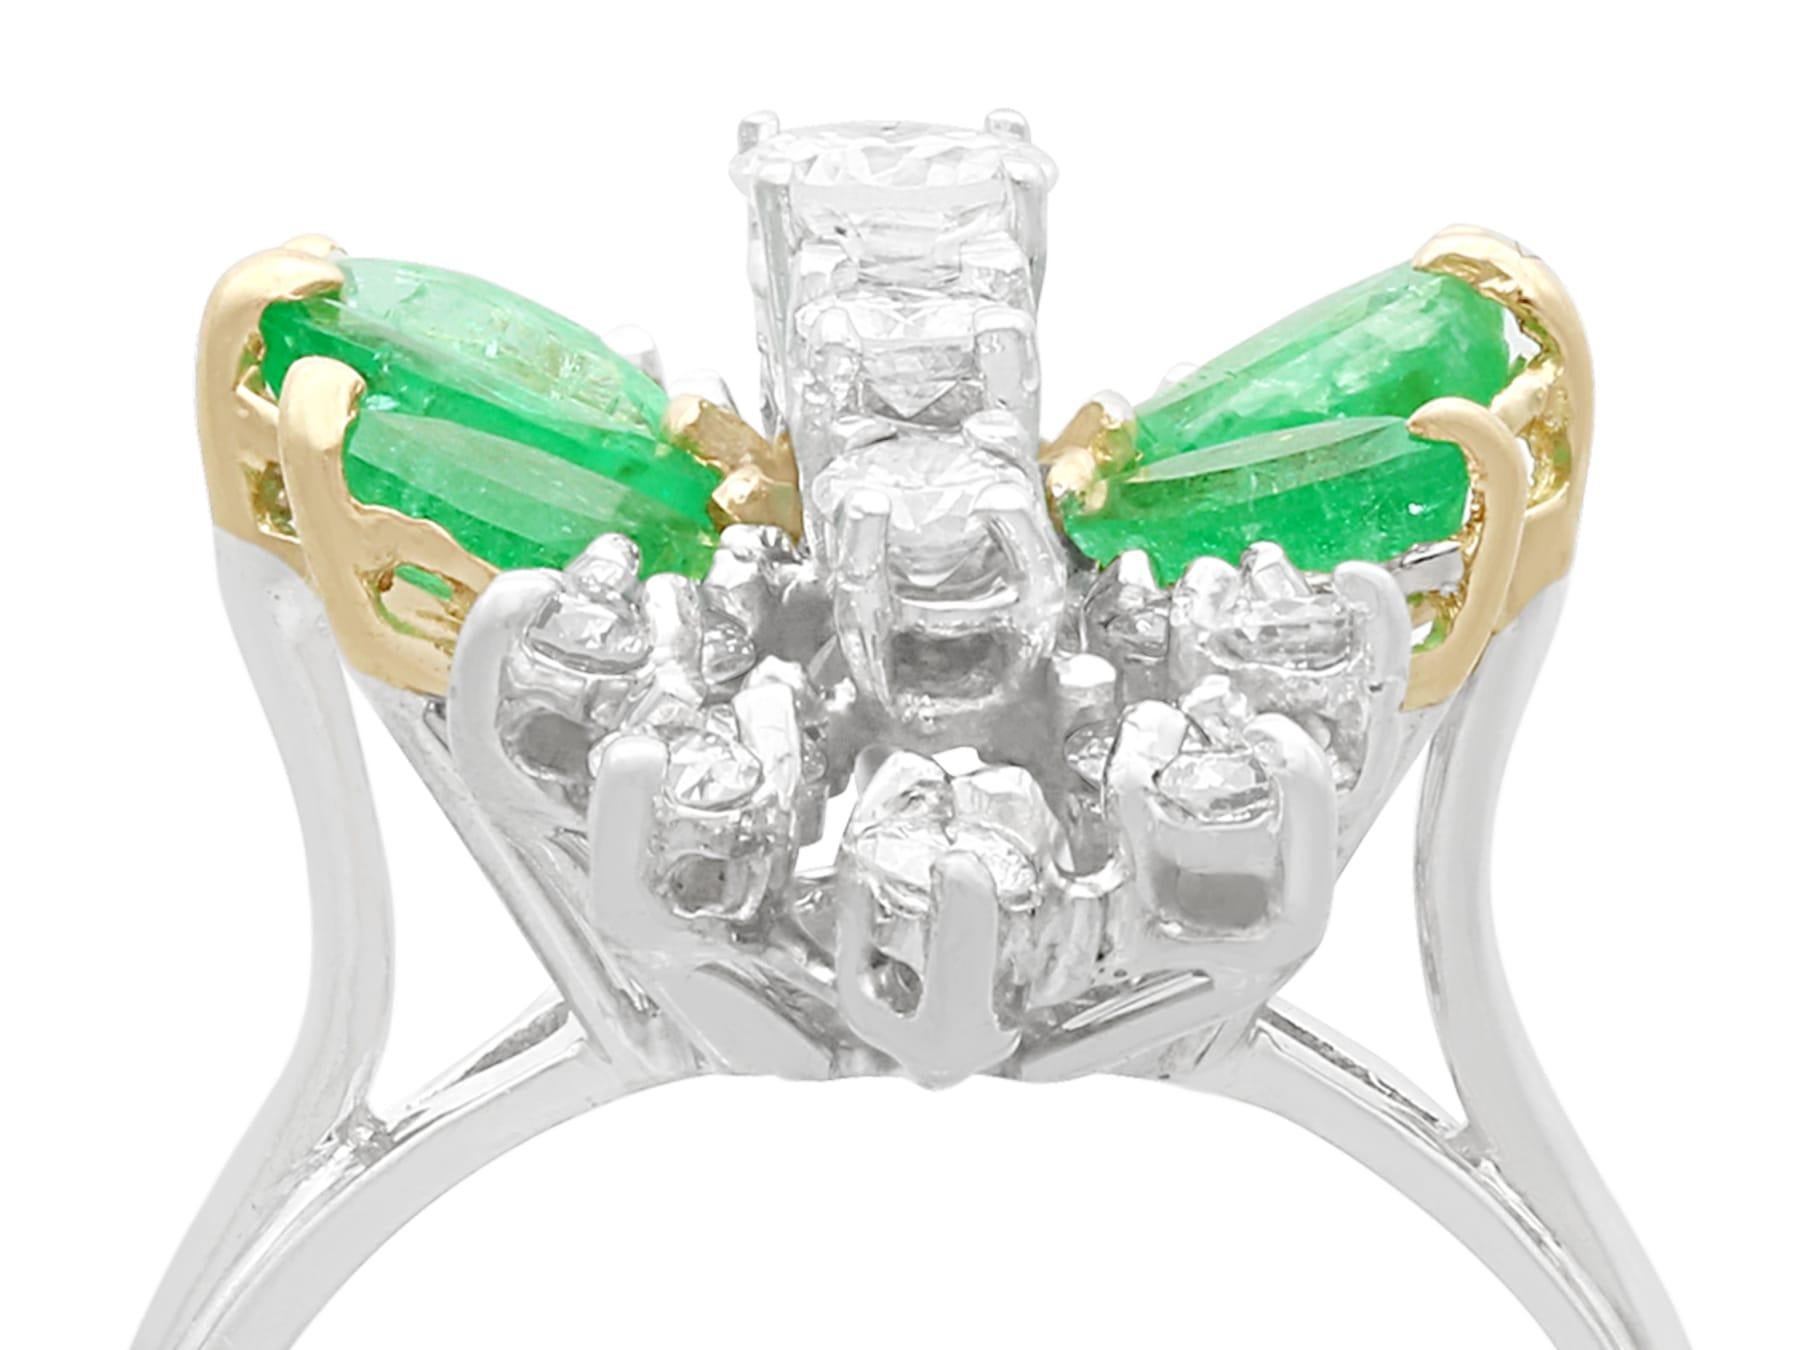 An impressive unusual vintage 1.62 carat emerald and 1.28 carat diamond, 12 karat white and yellow gold dress ring; part of our diverse emerald jewelry collections.

This fine and impressive unusual diamond and emerald ring has been crafted in 12k